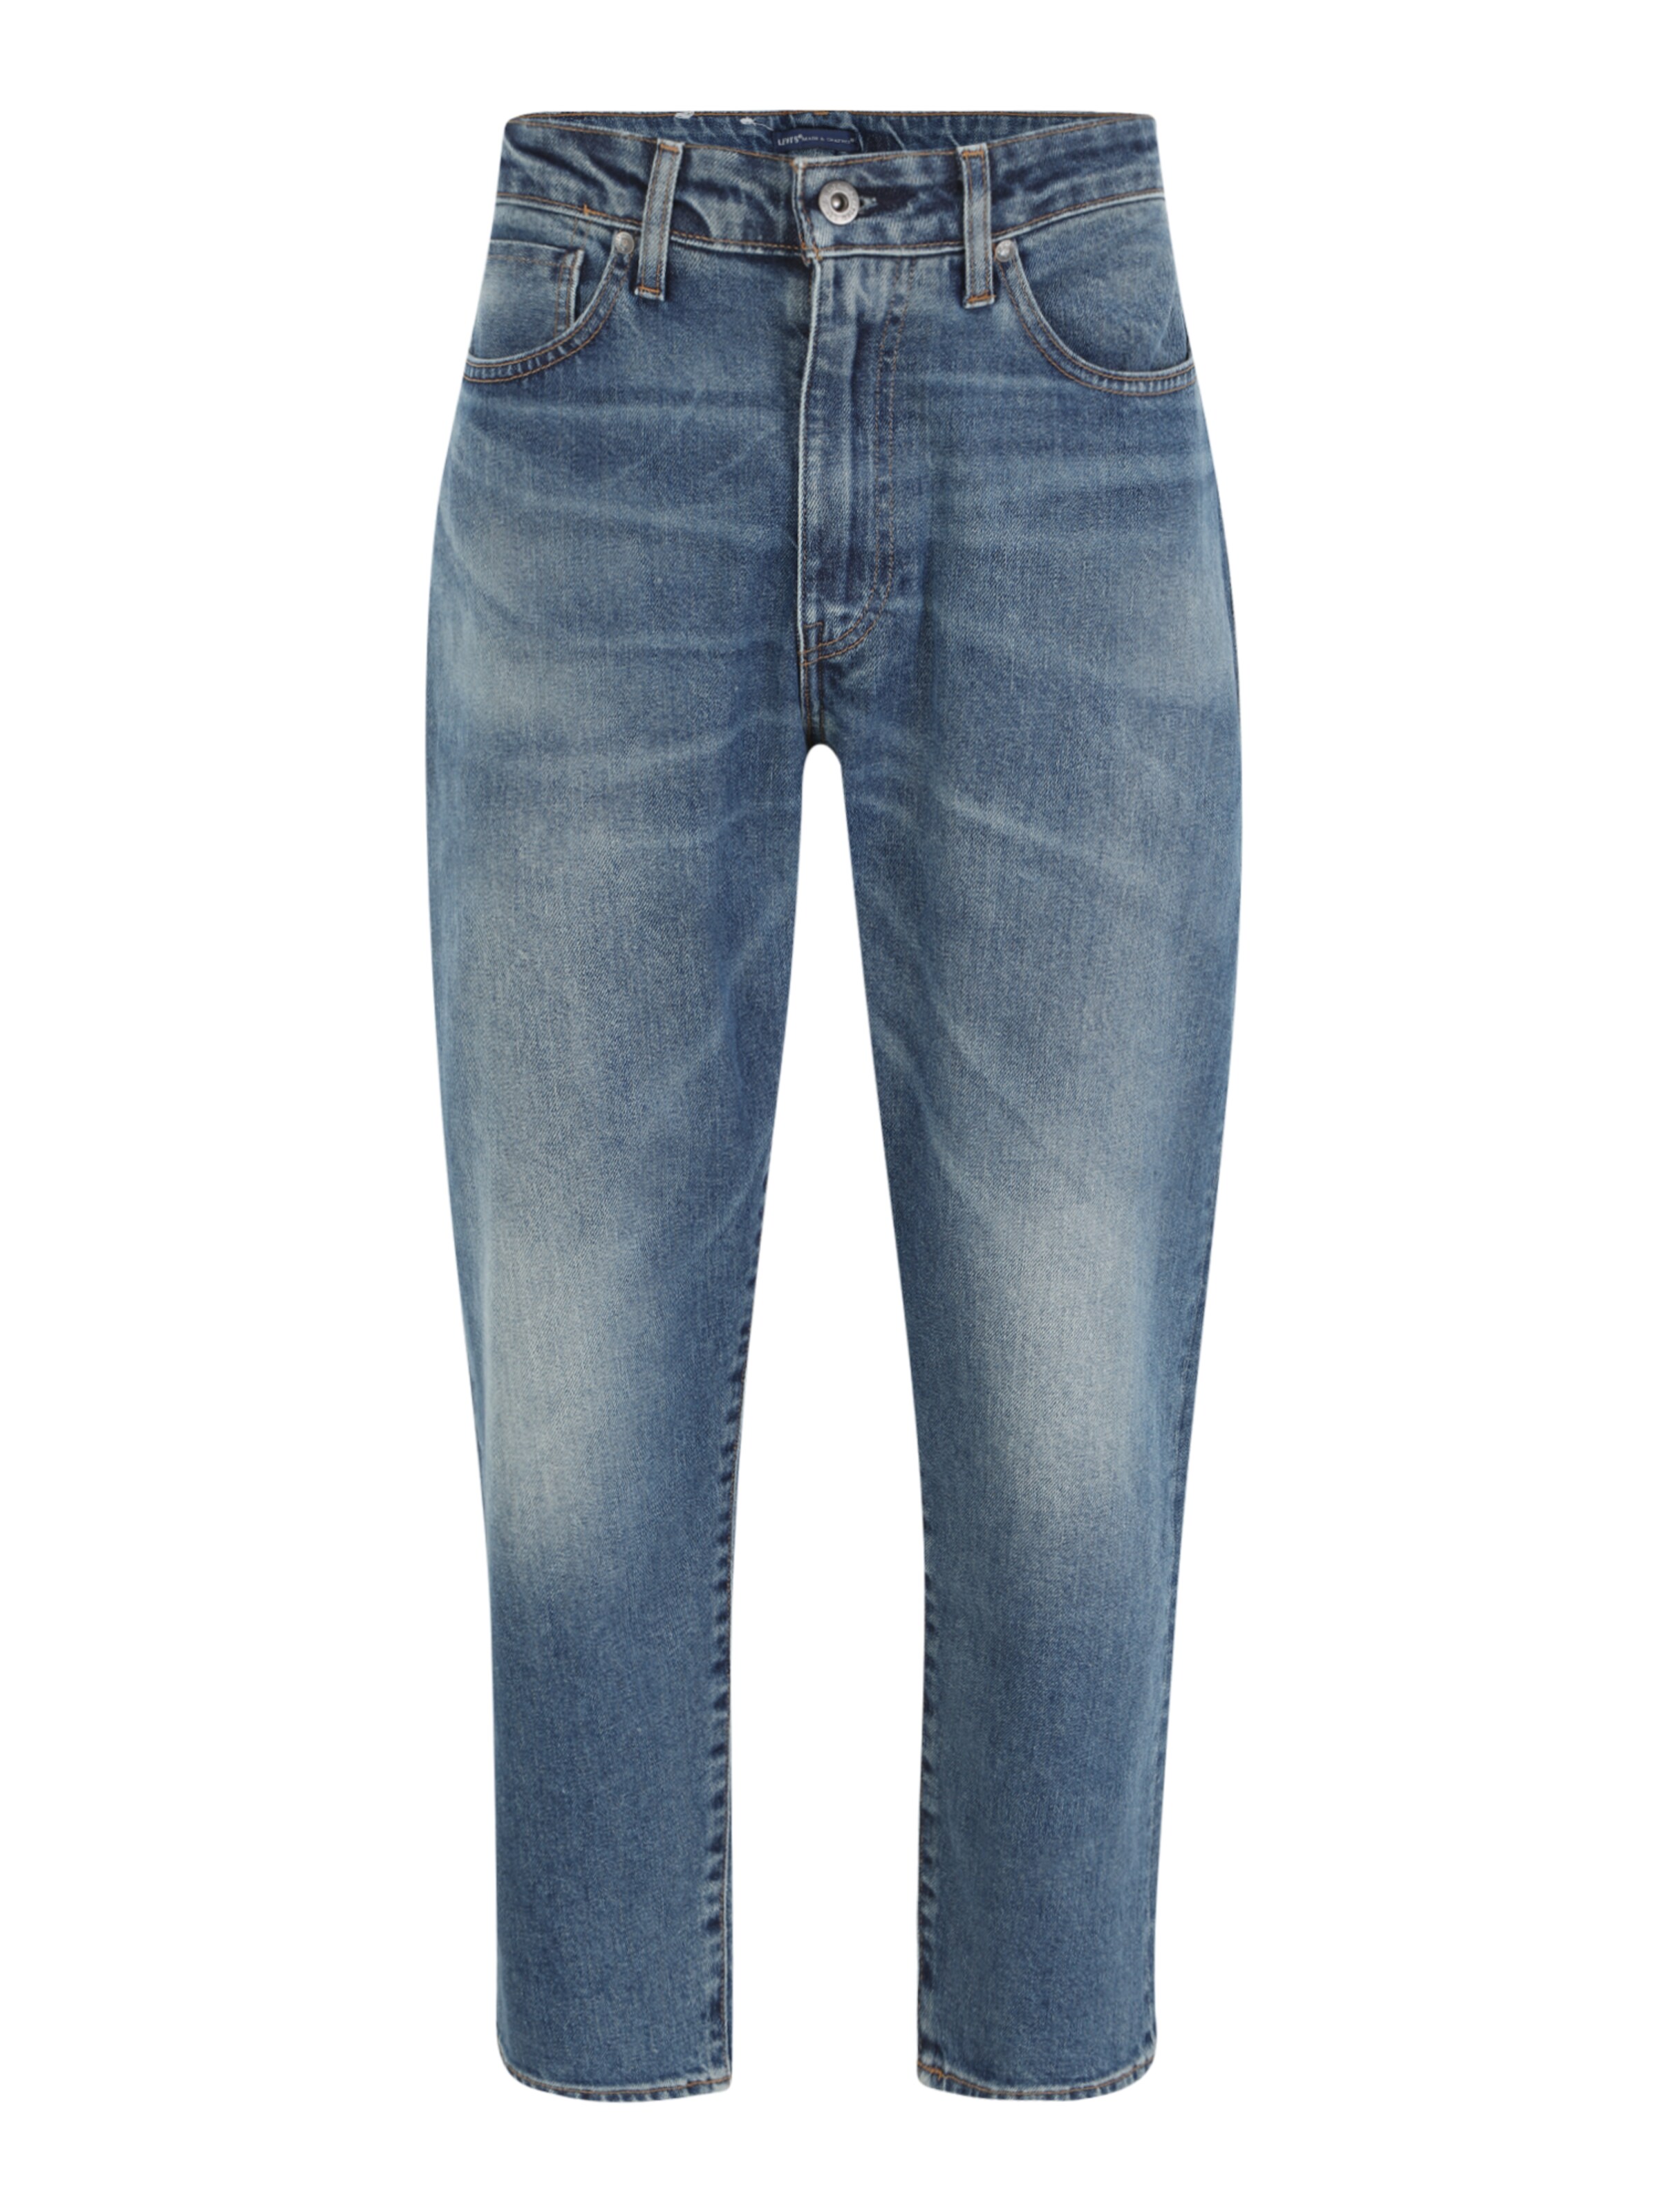 PFOfR Uomo Levis Made & Crafted Jeans DRAFT in Blu 